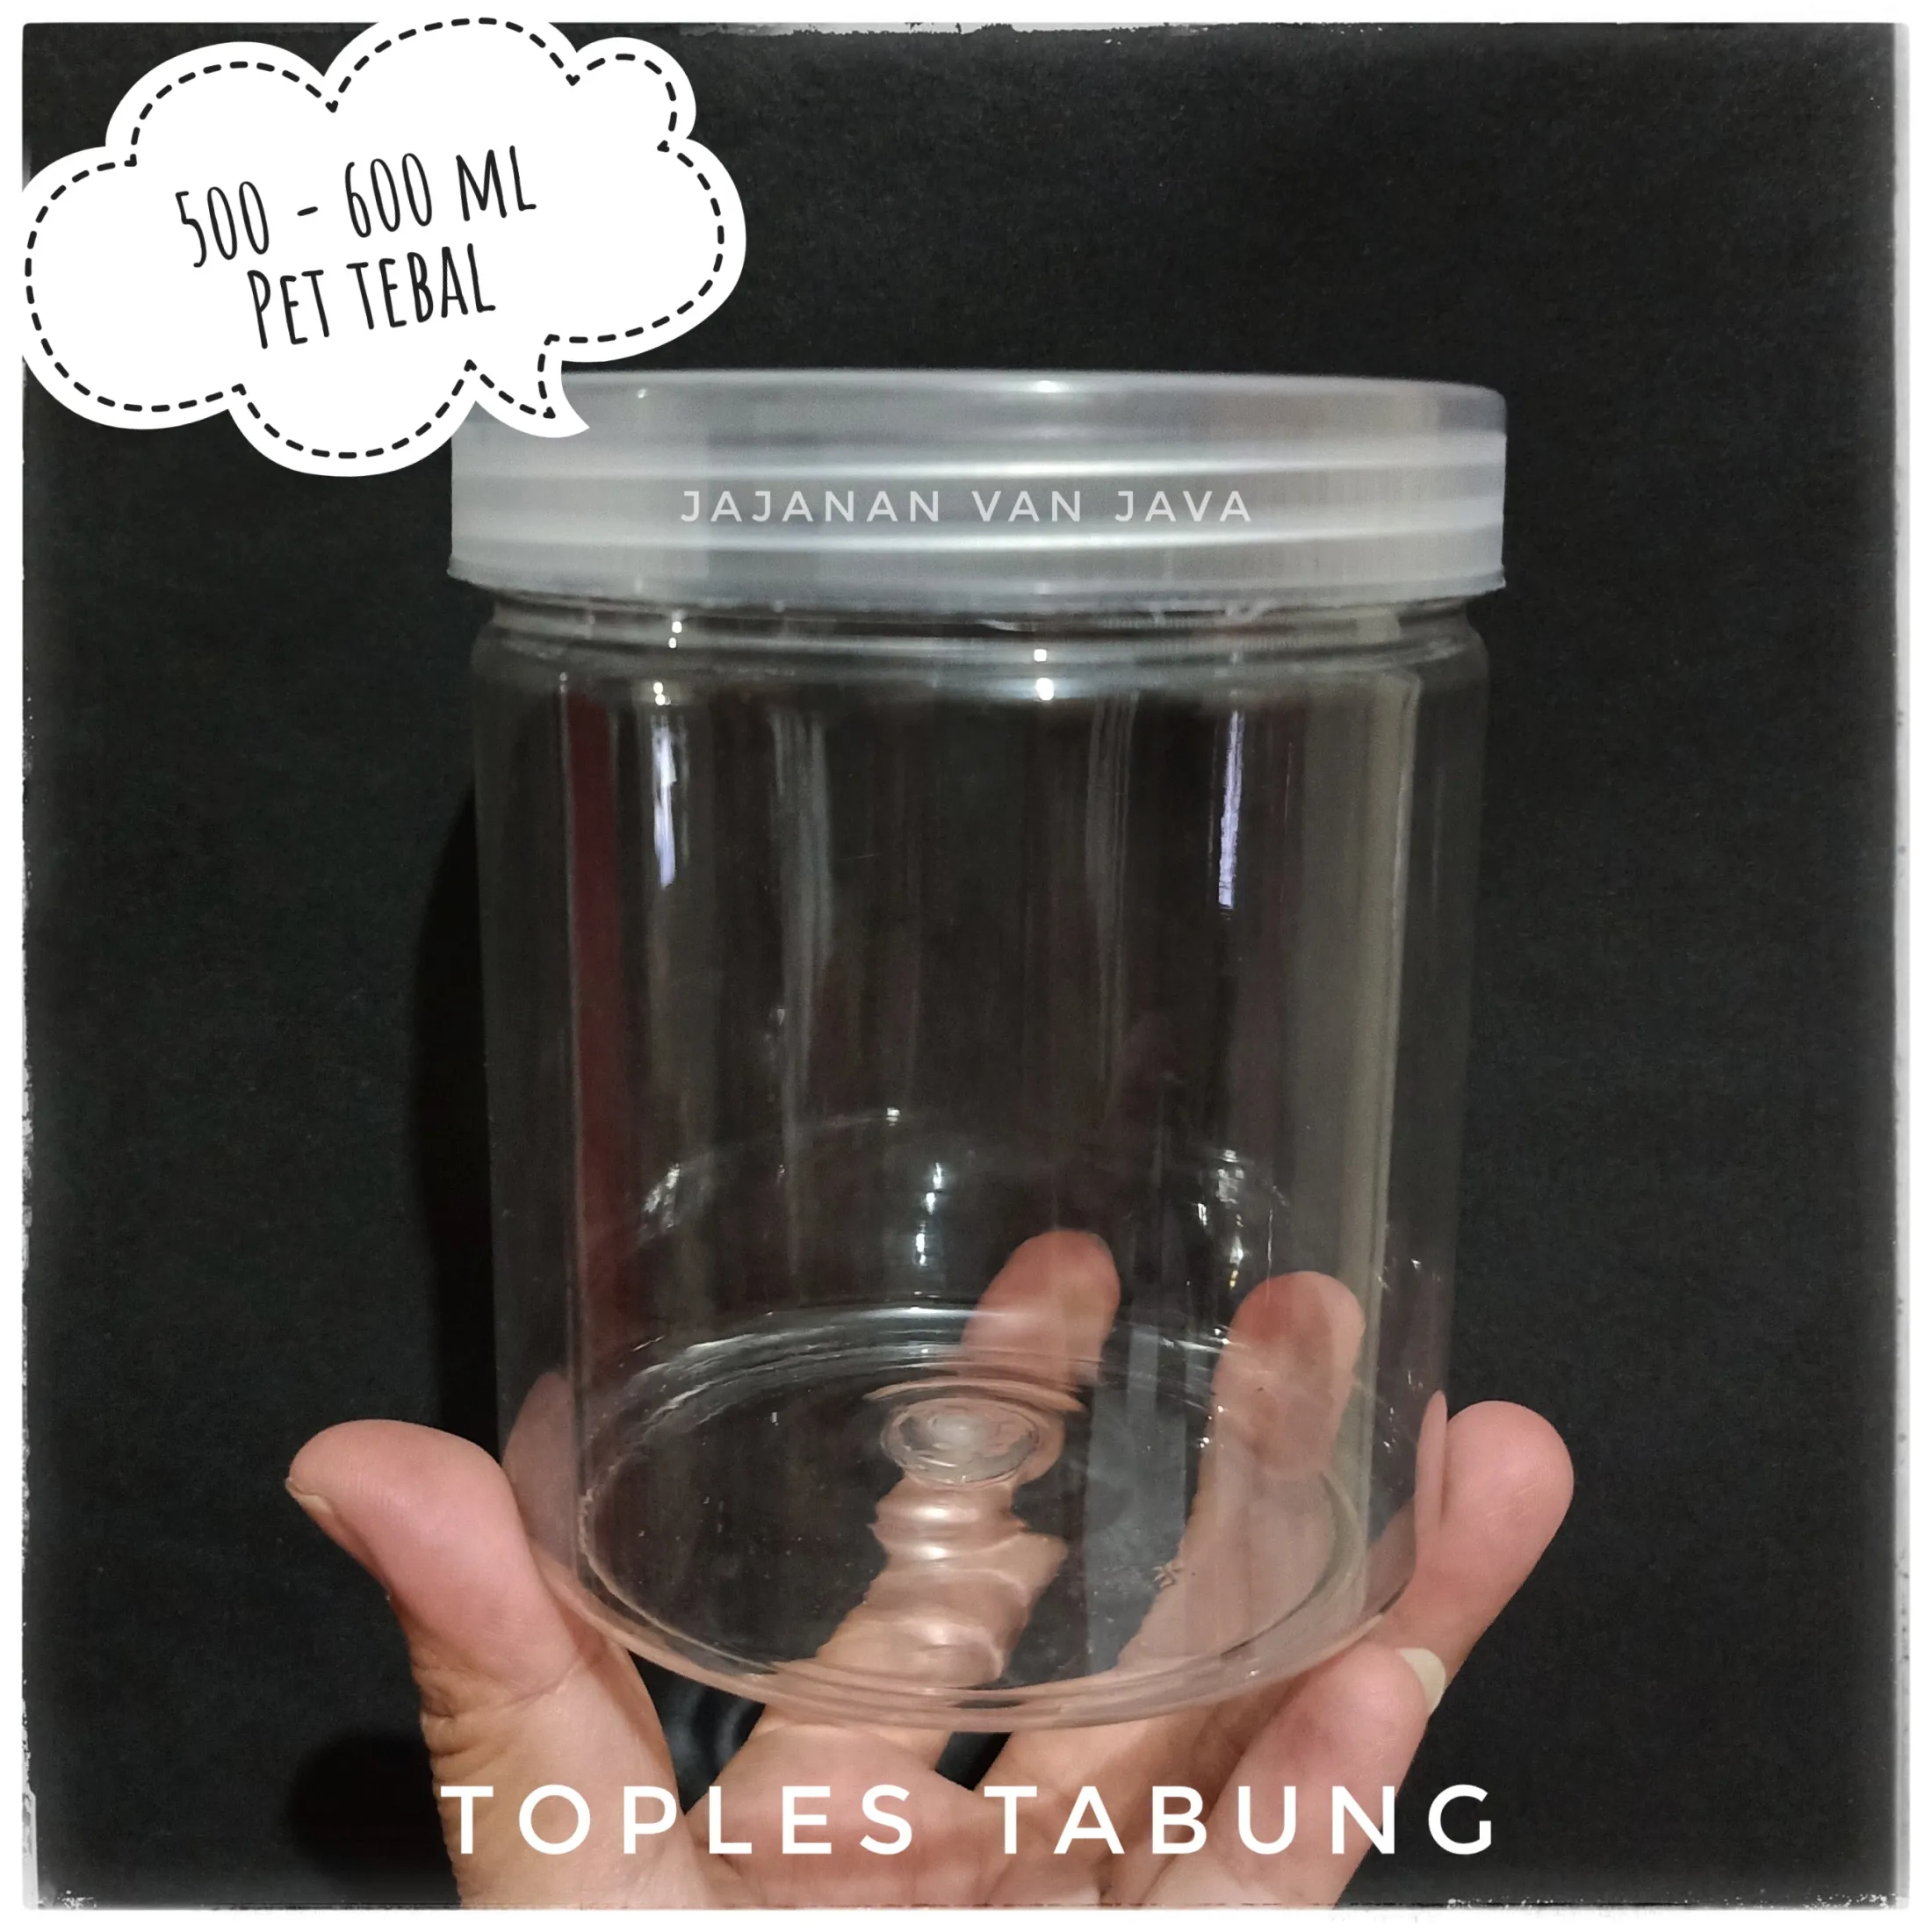 Toples Category:Topless women